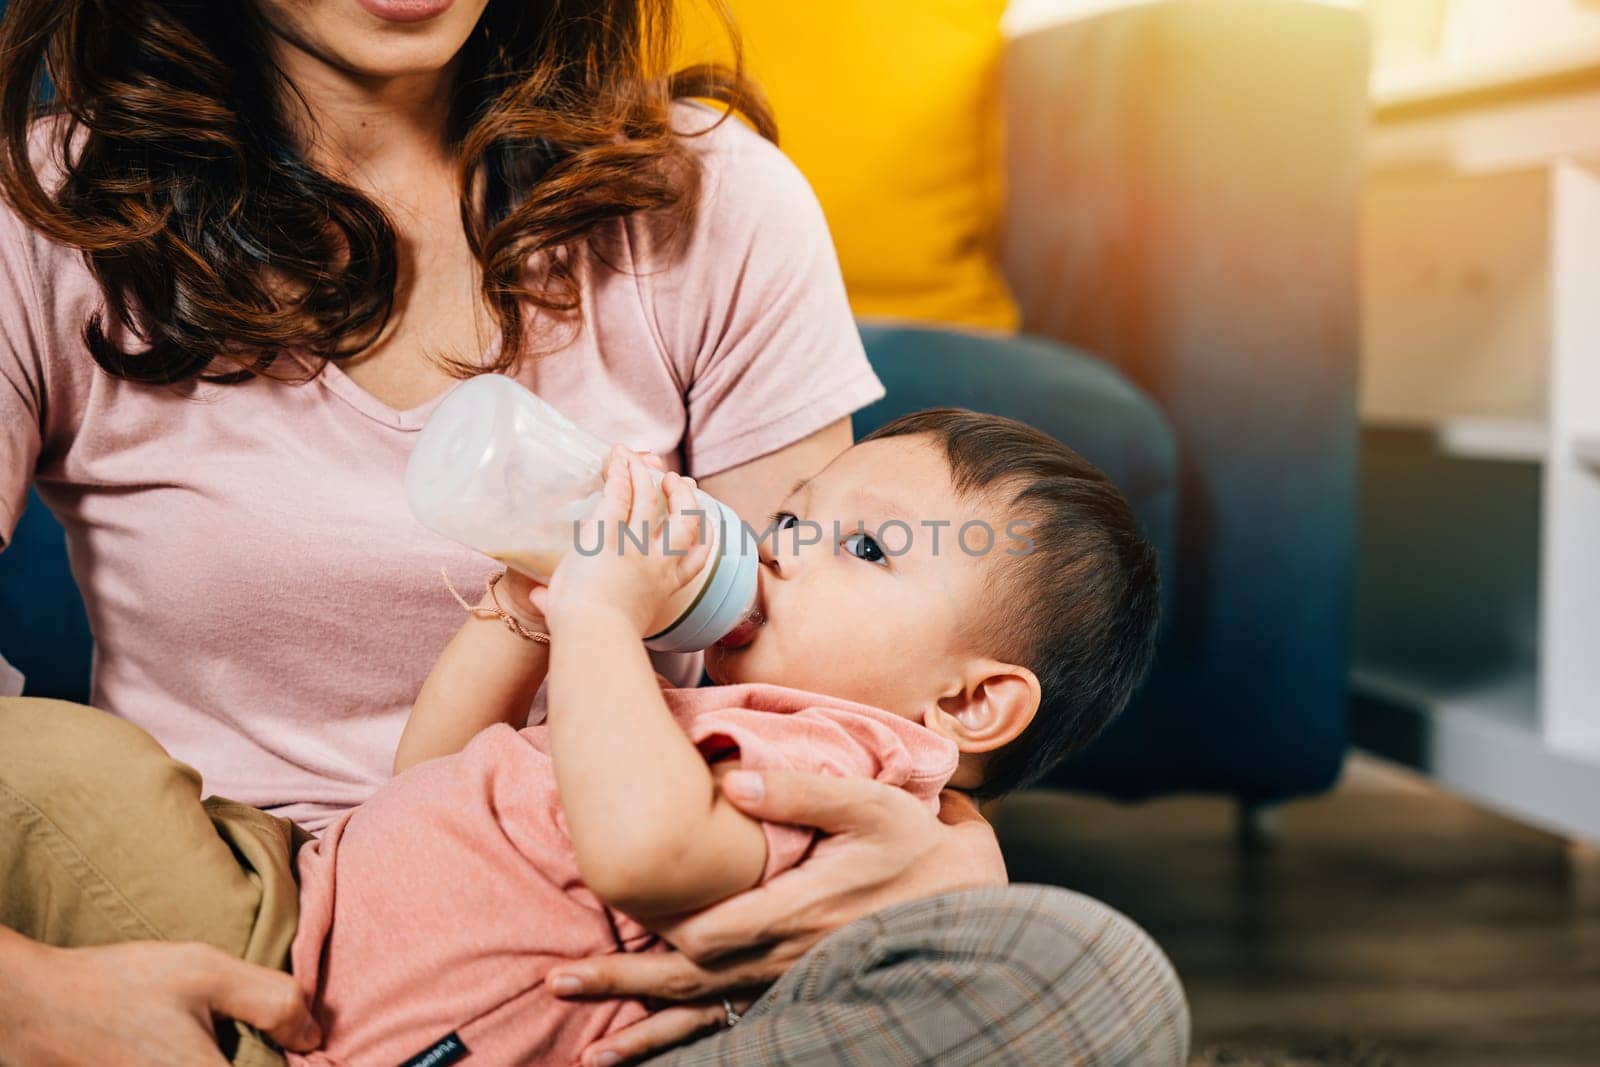 A mother with a loving hand feeds her adorable Asian baby from a baby bottle in their home's living room epitomizing the essence of family togetherness happiness and nurturing care.